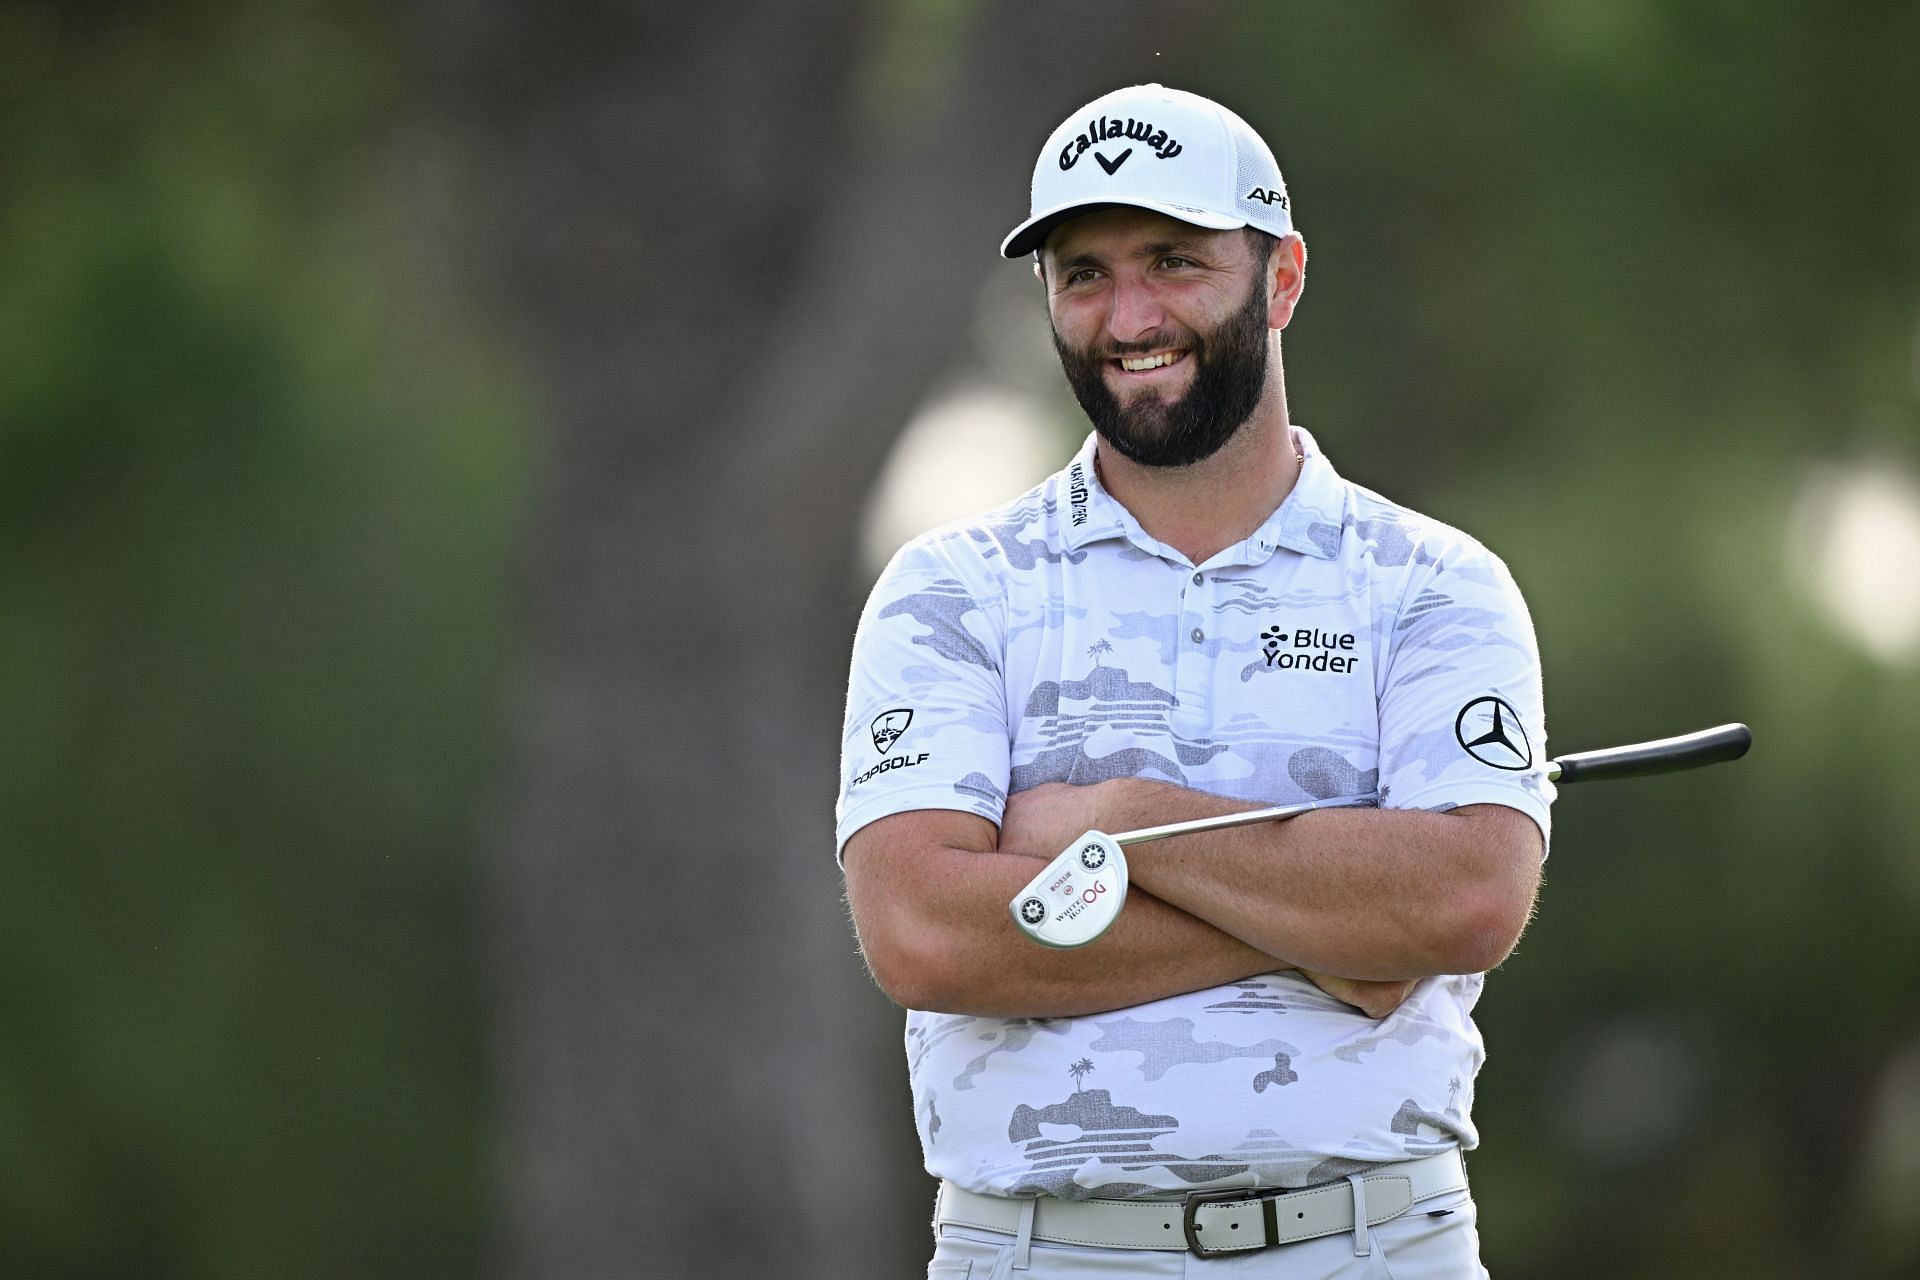 Jon Rahm is one of the favorites this year at the Augusta National